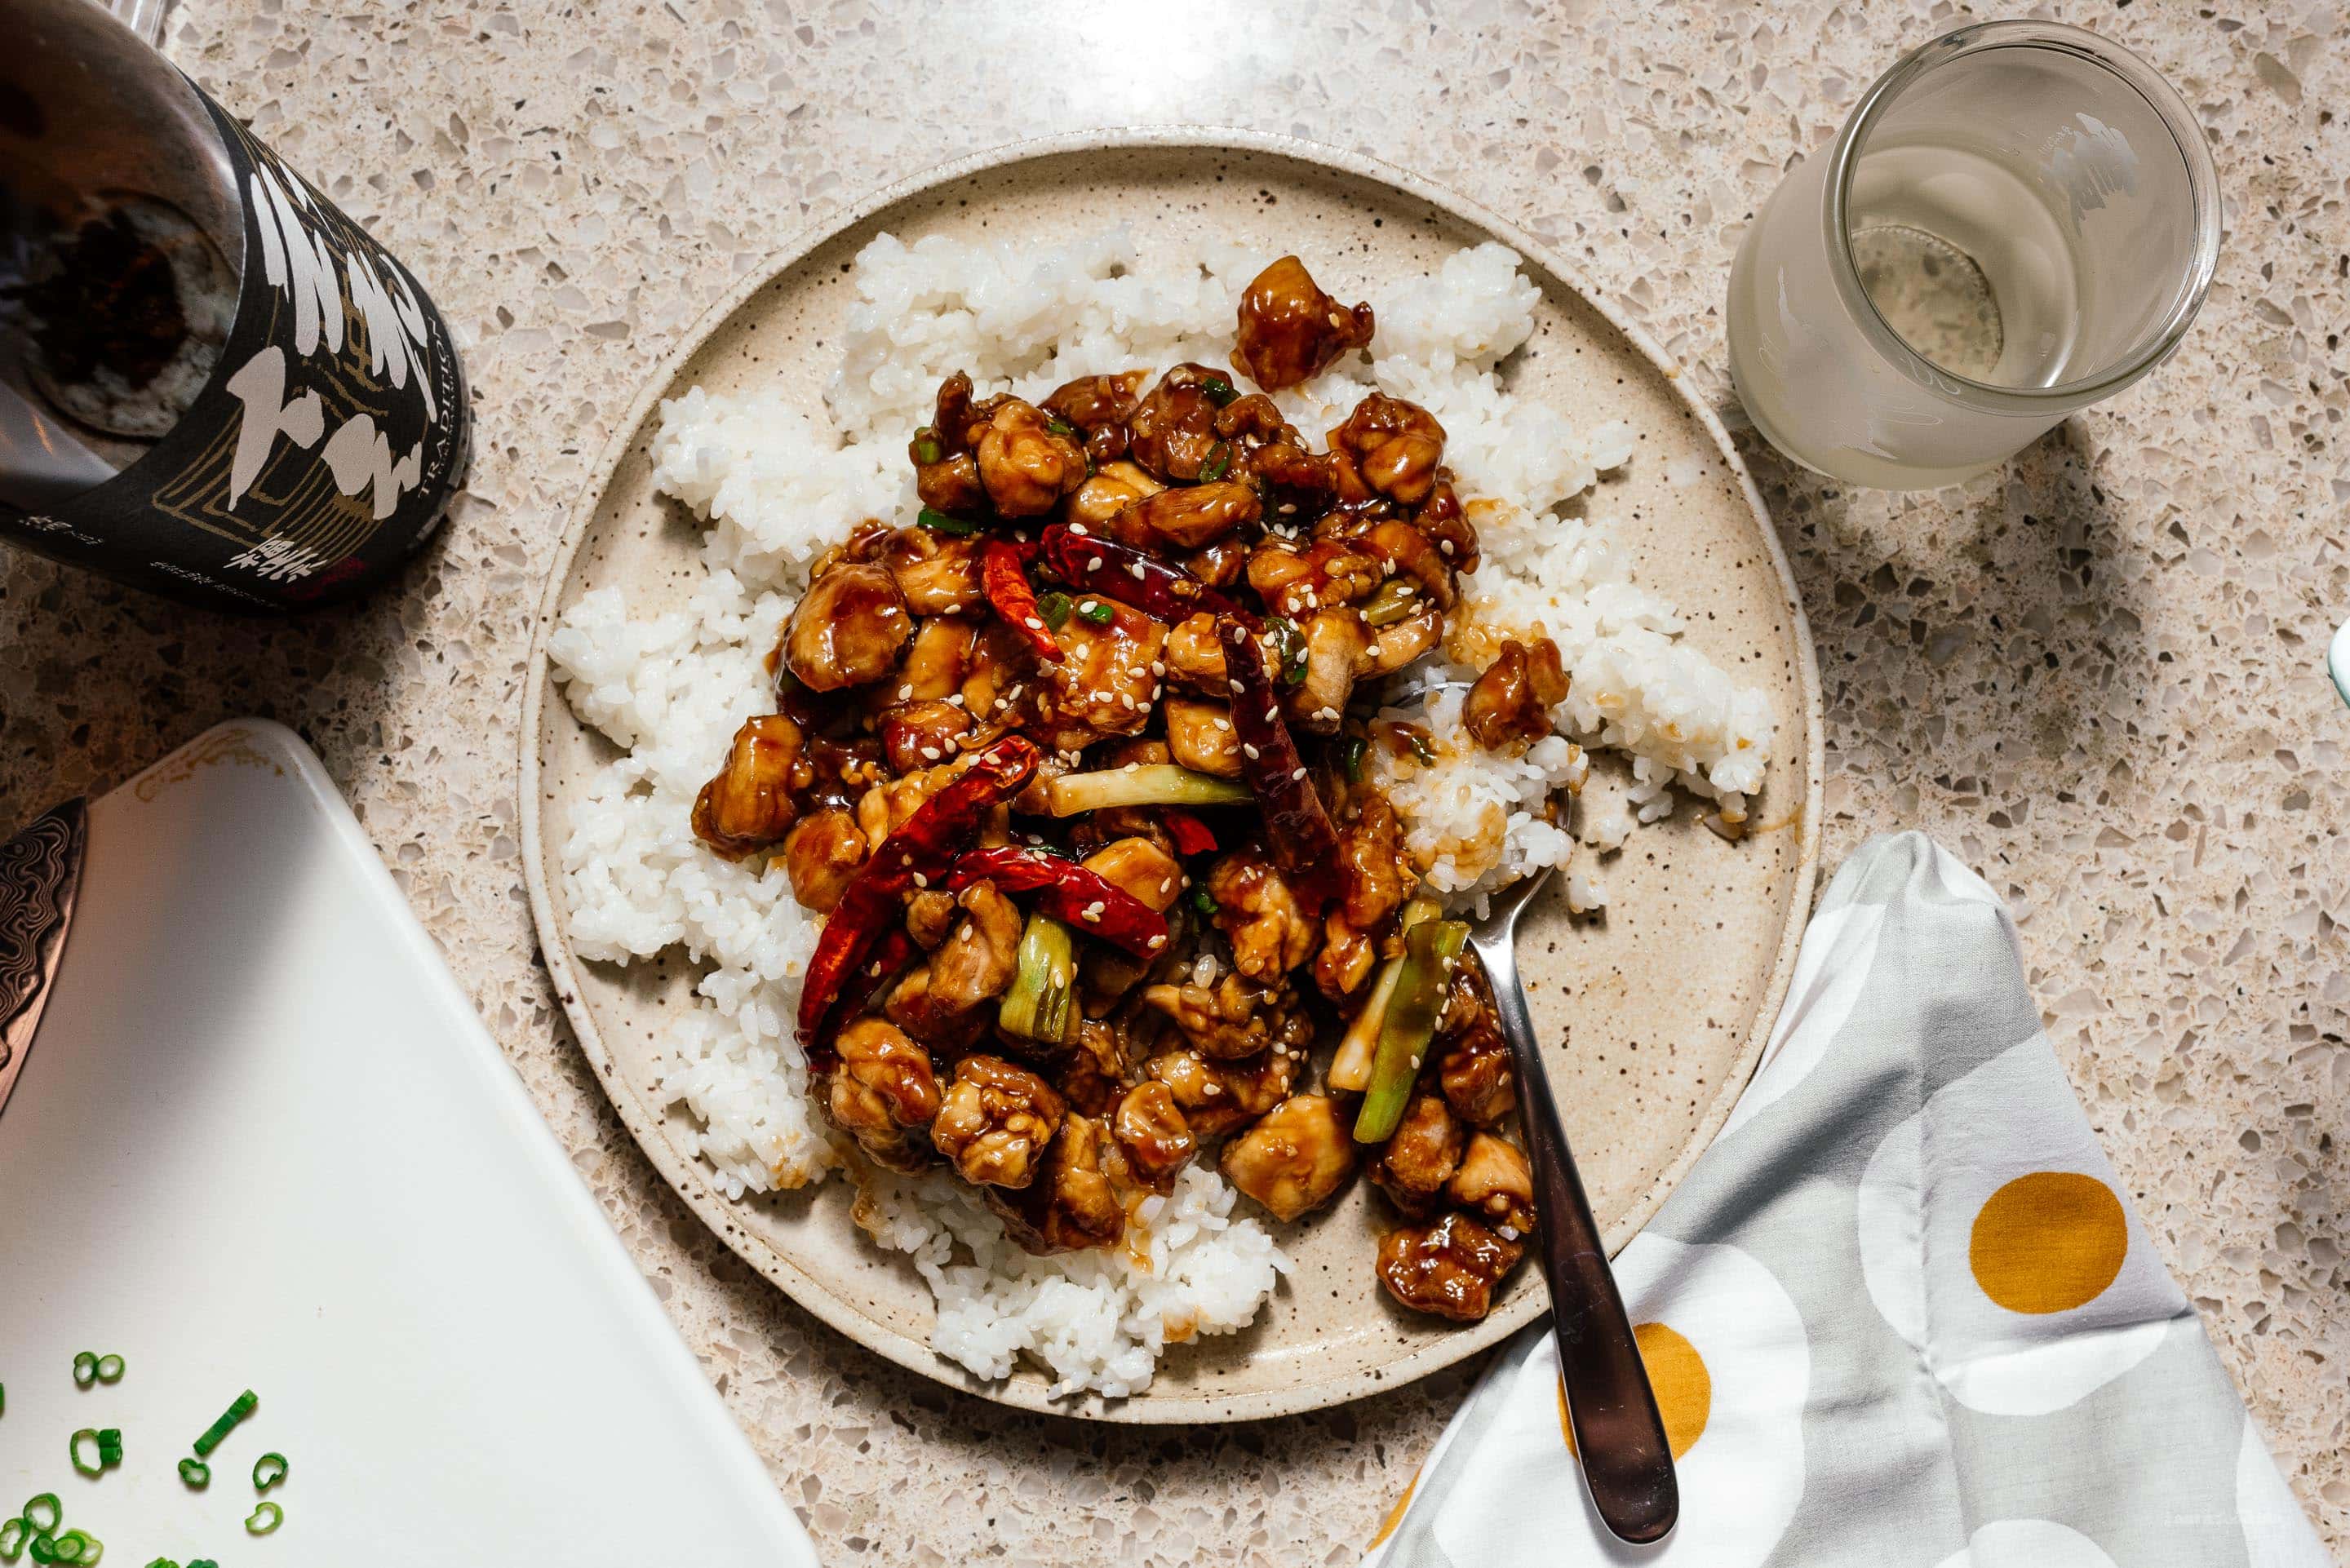 An Easy & Healthy Oven Baked General Tso’s Chicken Recipe